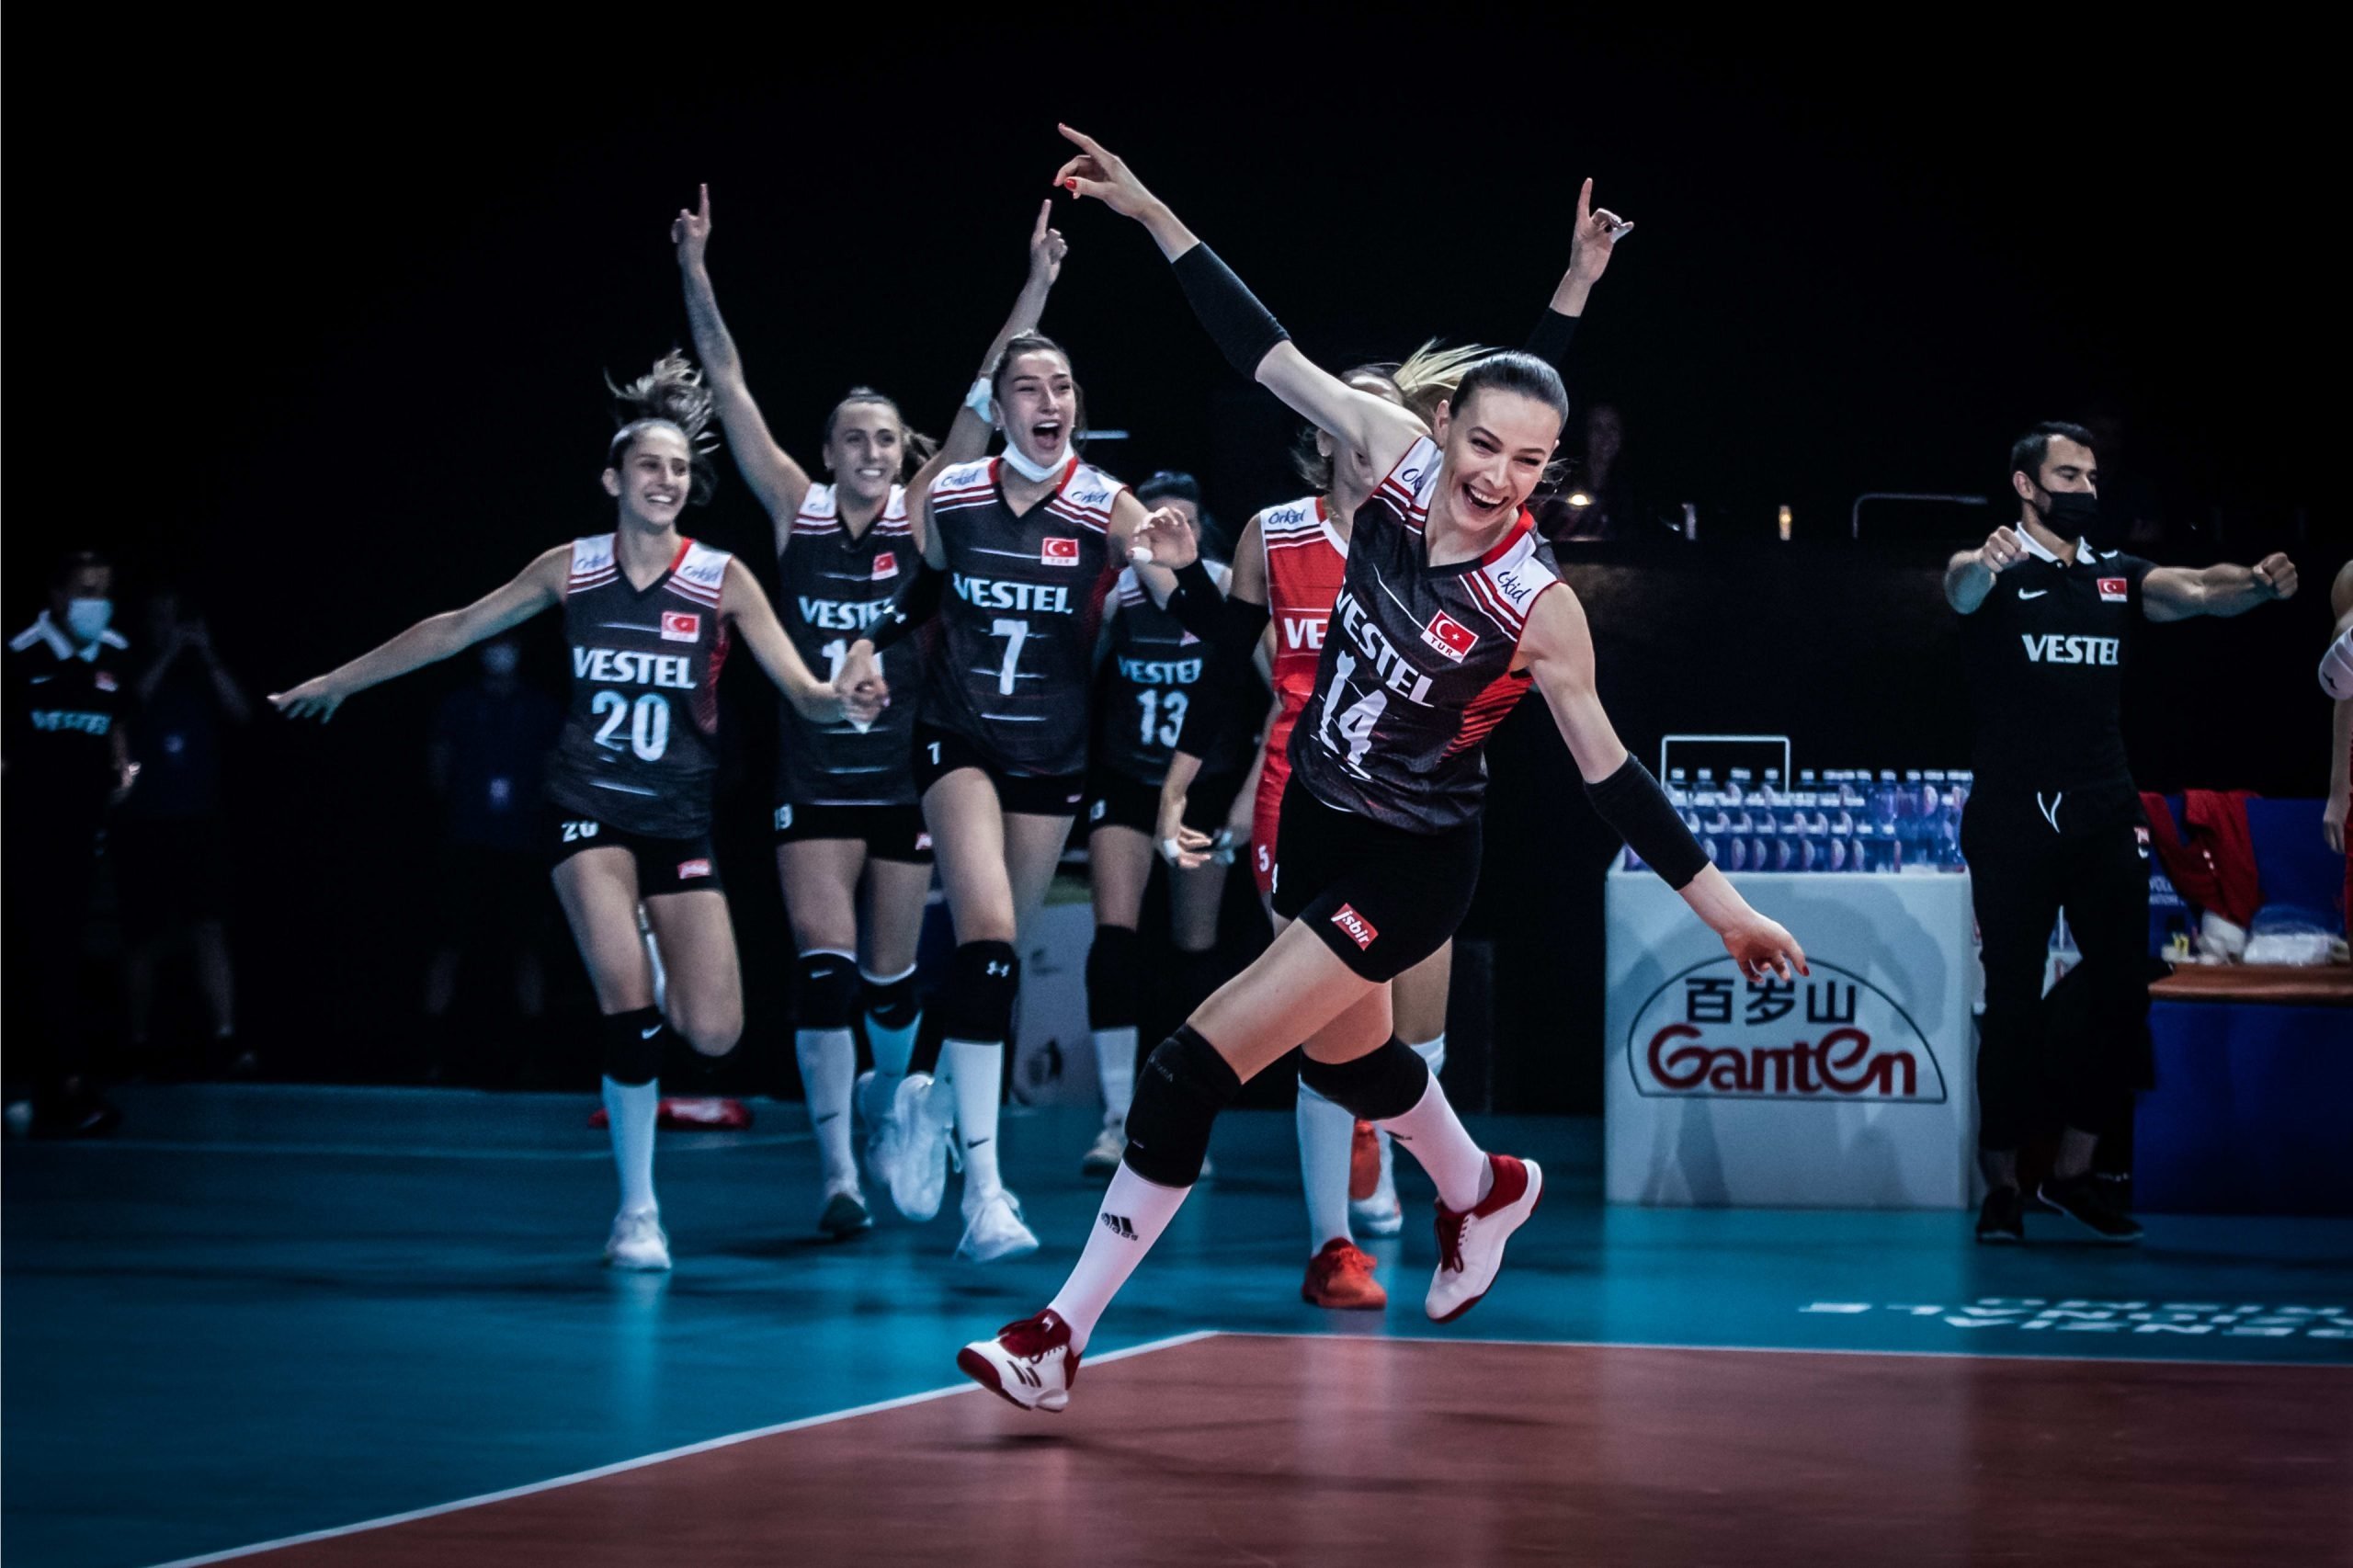 Turkey takes bronze in Volleyball Women's Nations League | Daily Sabah